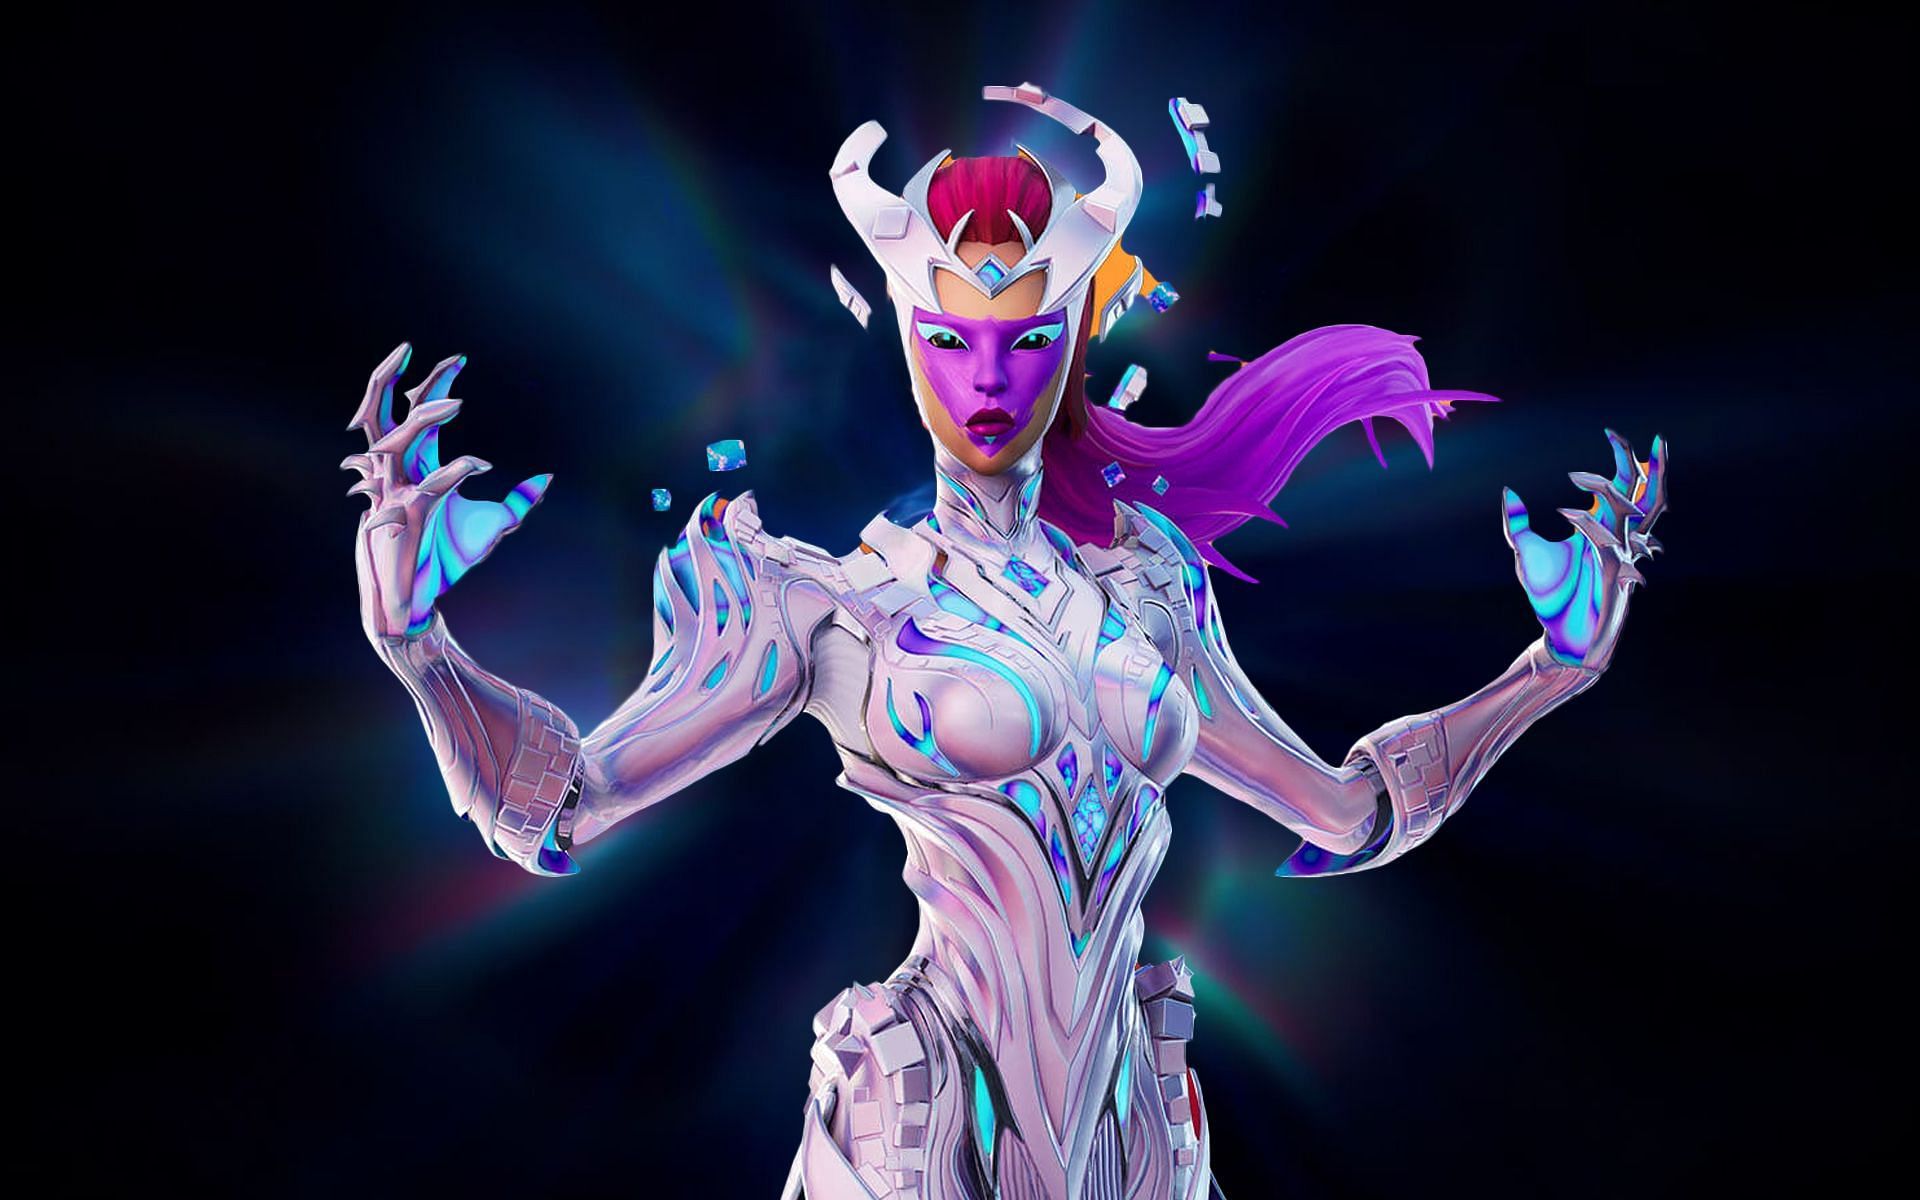 A new Black Hole event in Fortnite might occur due to the Cube Queen (Image via Sportskeeda)